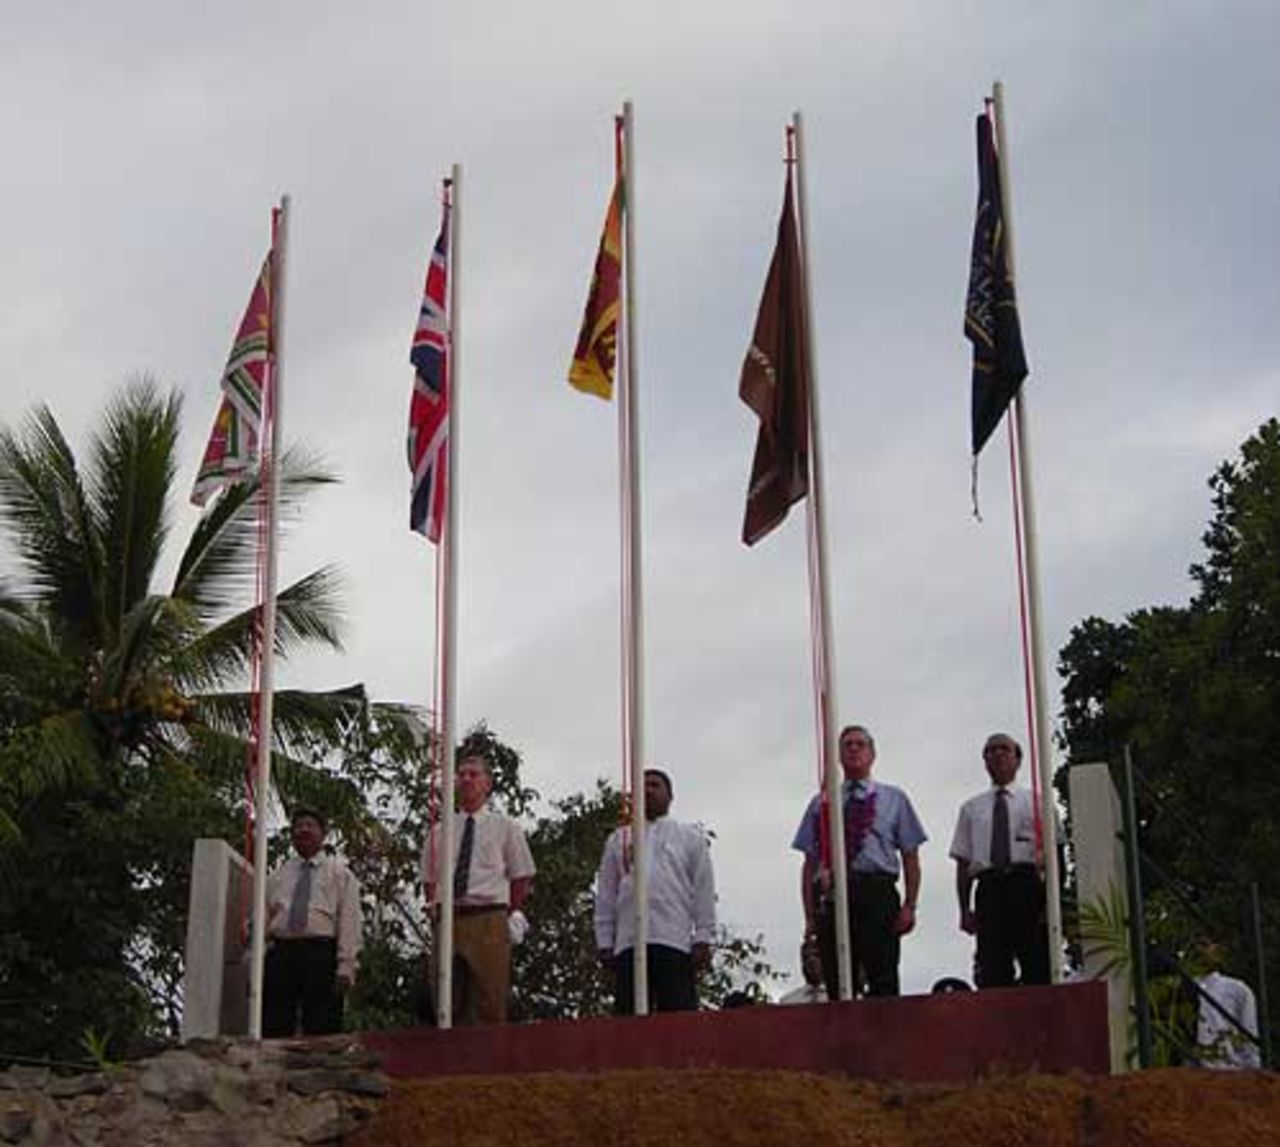 A ceremony to mark the opening of the Surrey Village south of Colombo, December 7, 2007